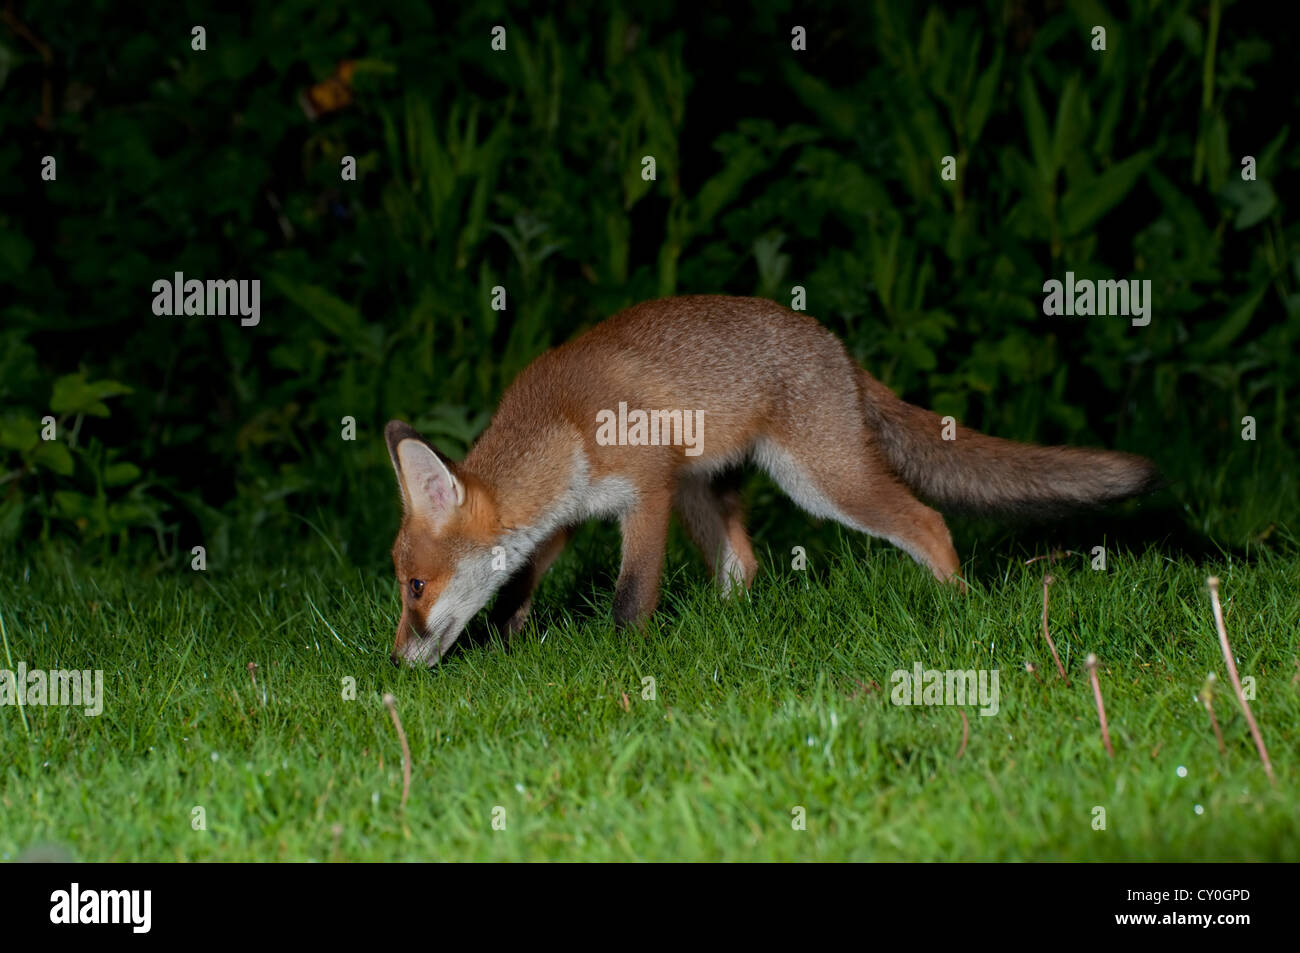 A young red fox sniffs the ground while searching for food in a suburban garden at night Stock Photo